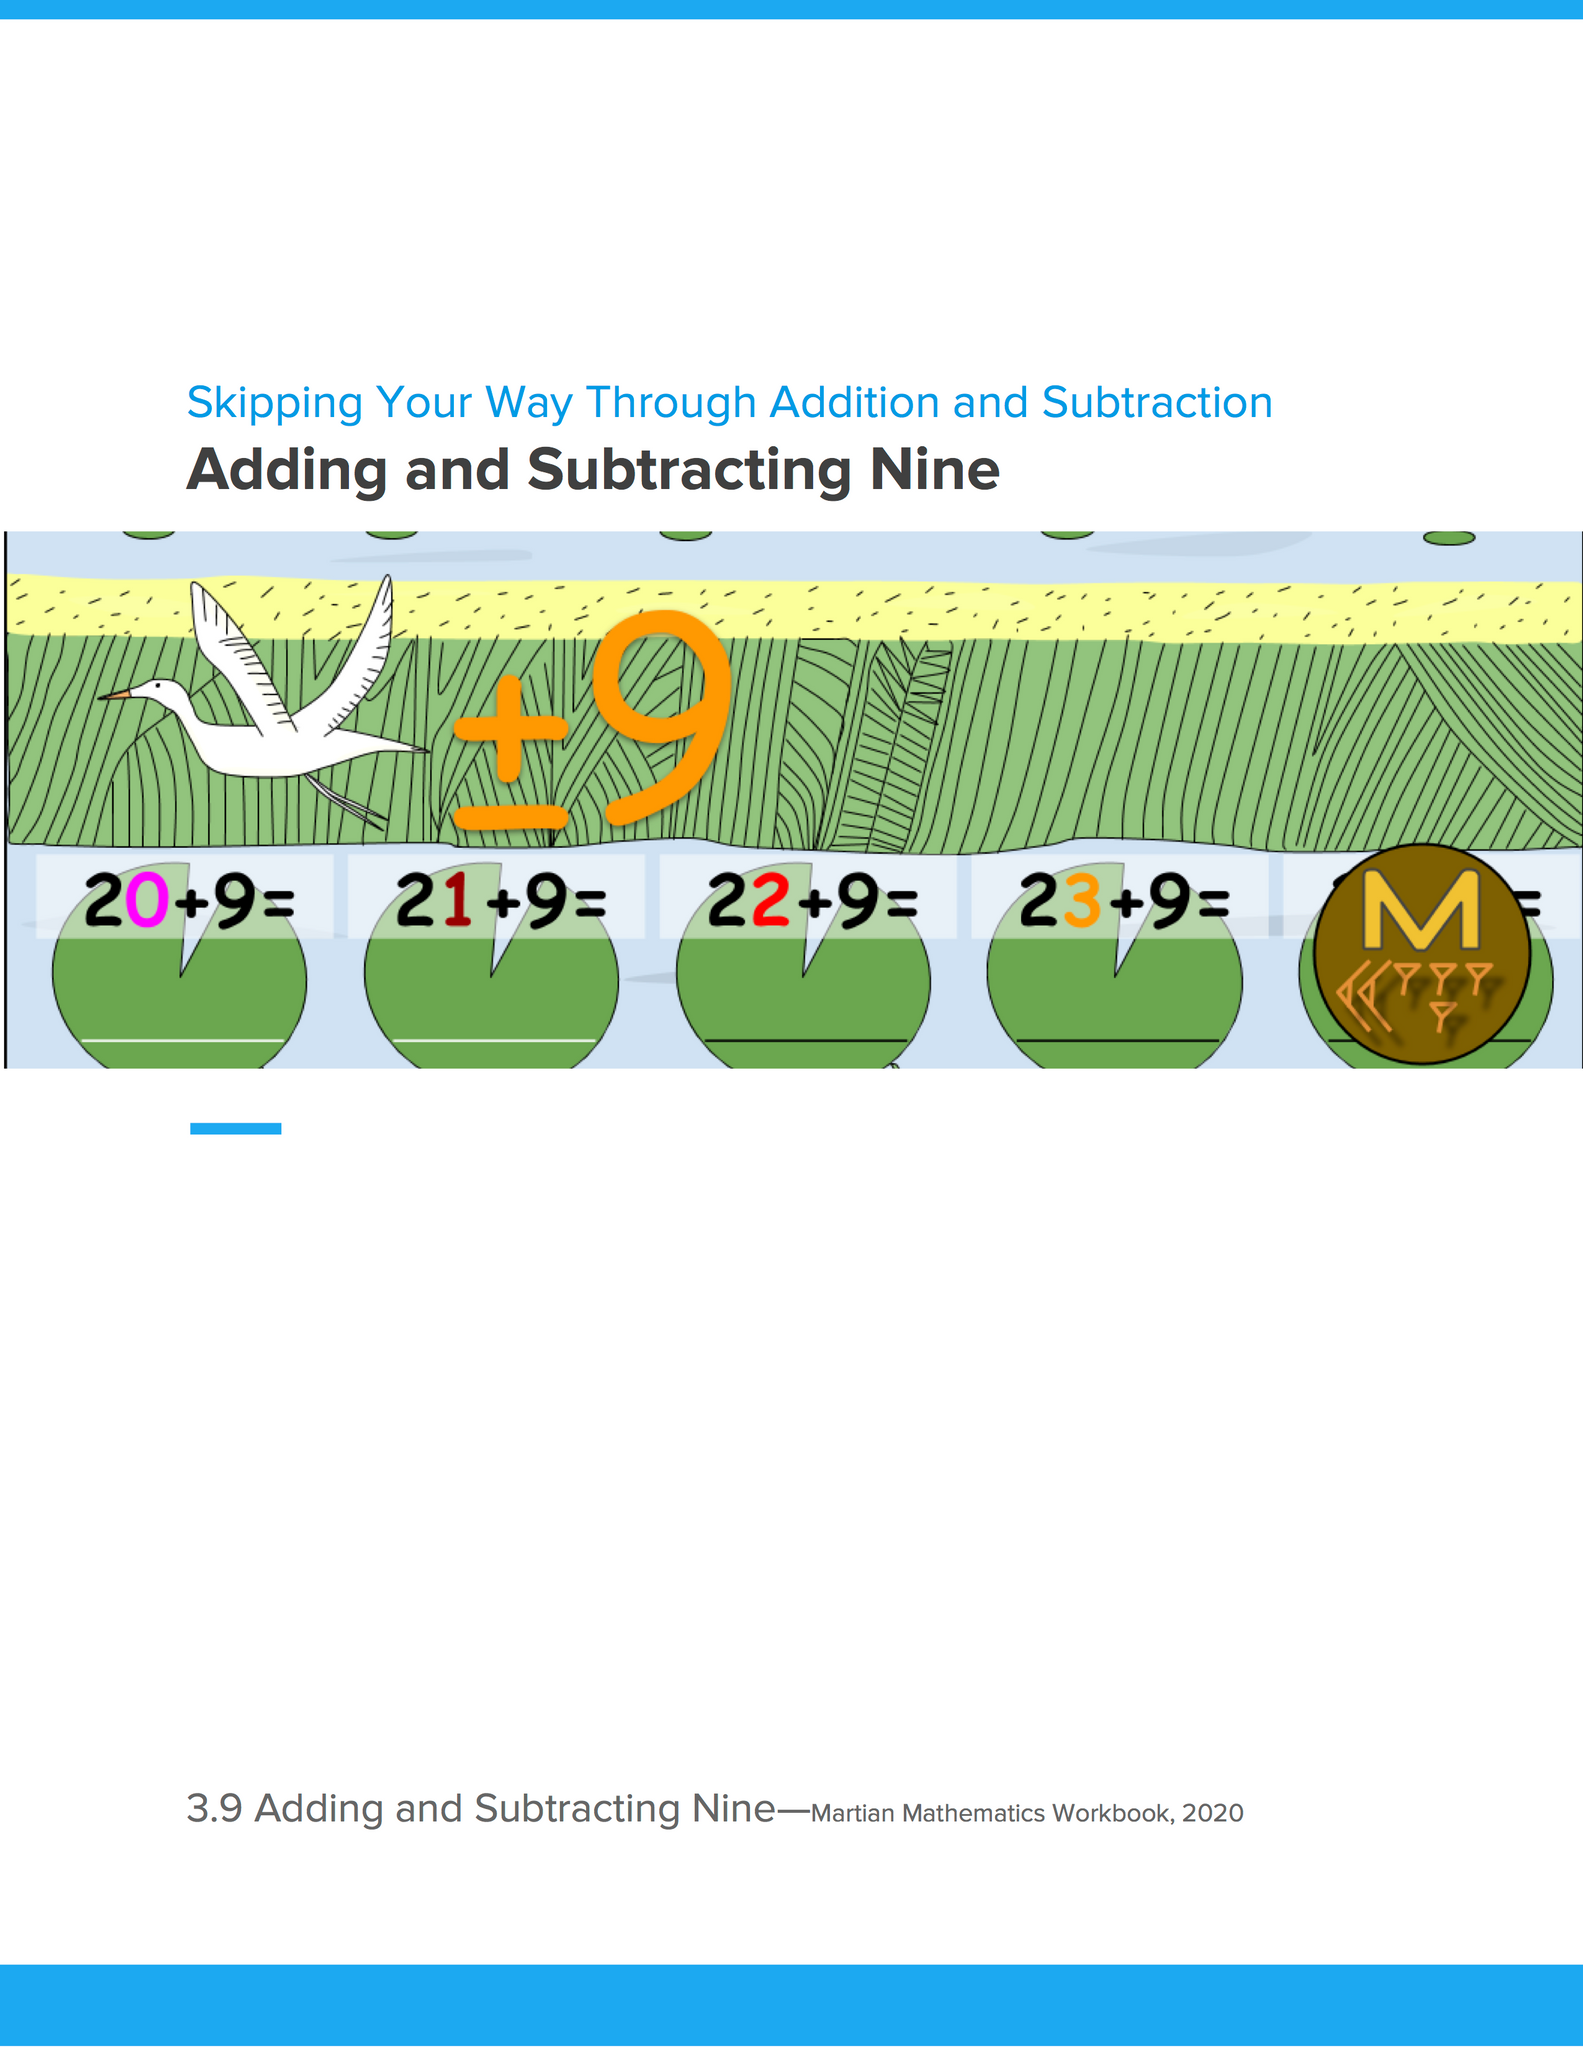 Adding and Subtracting Nine